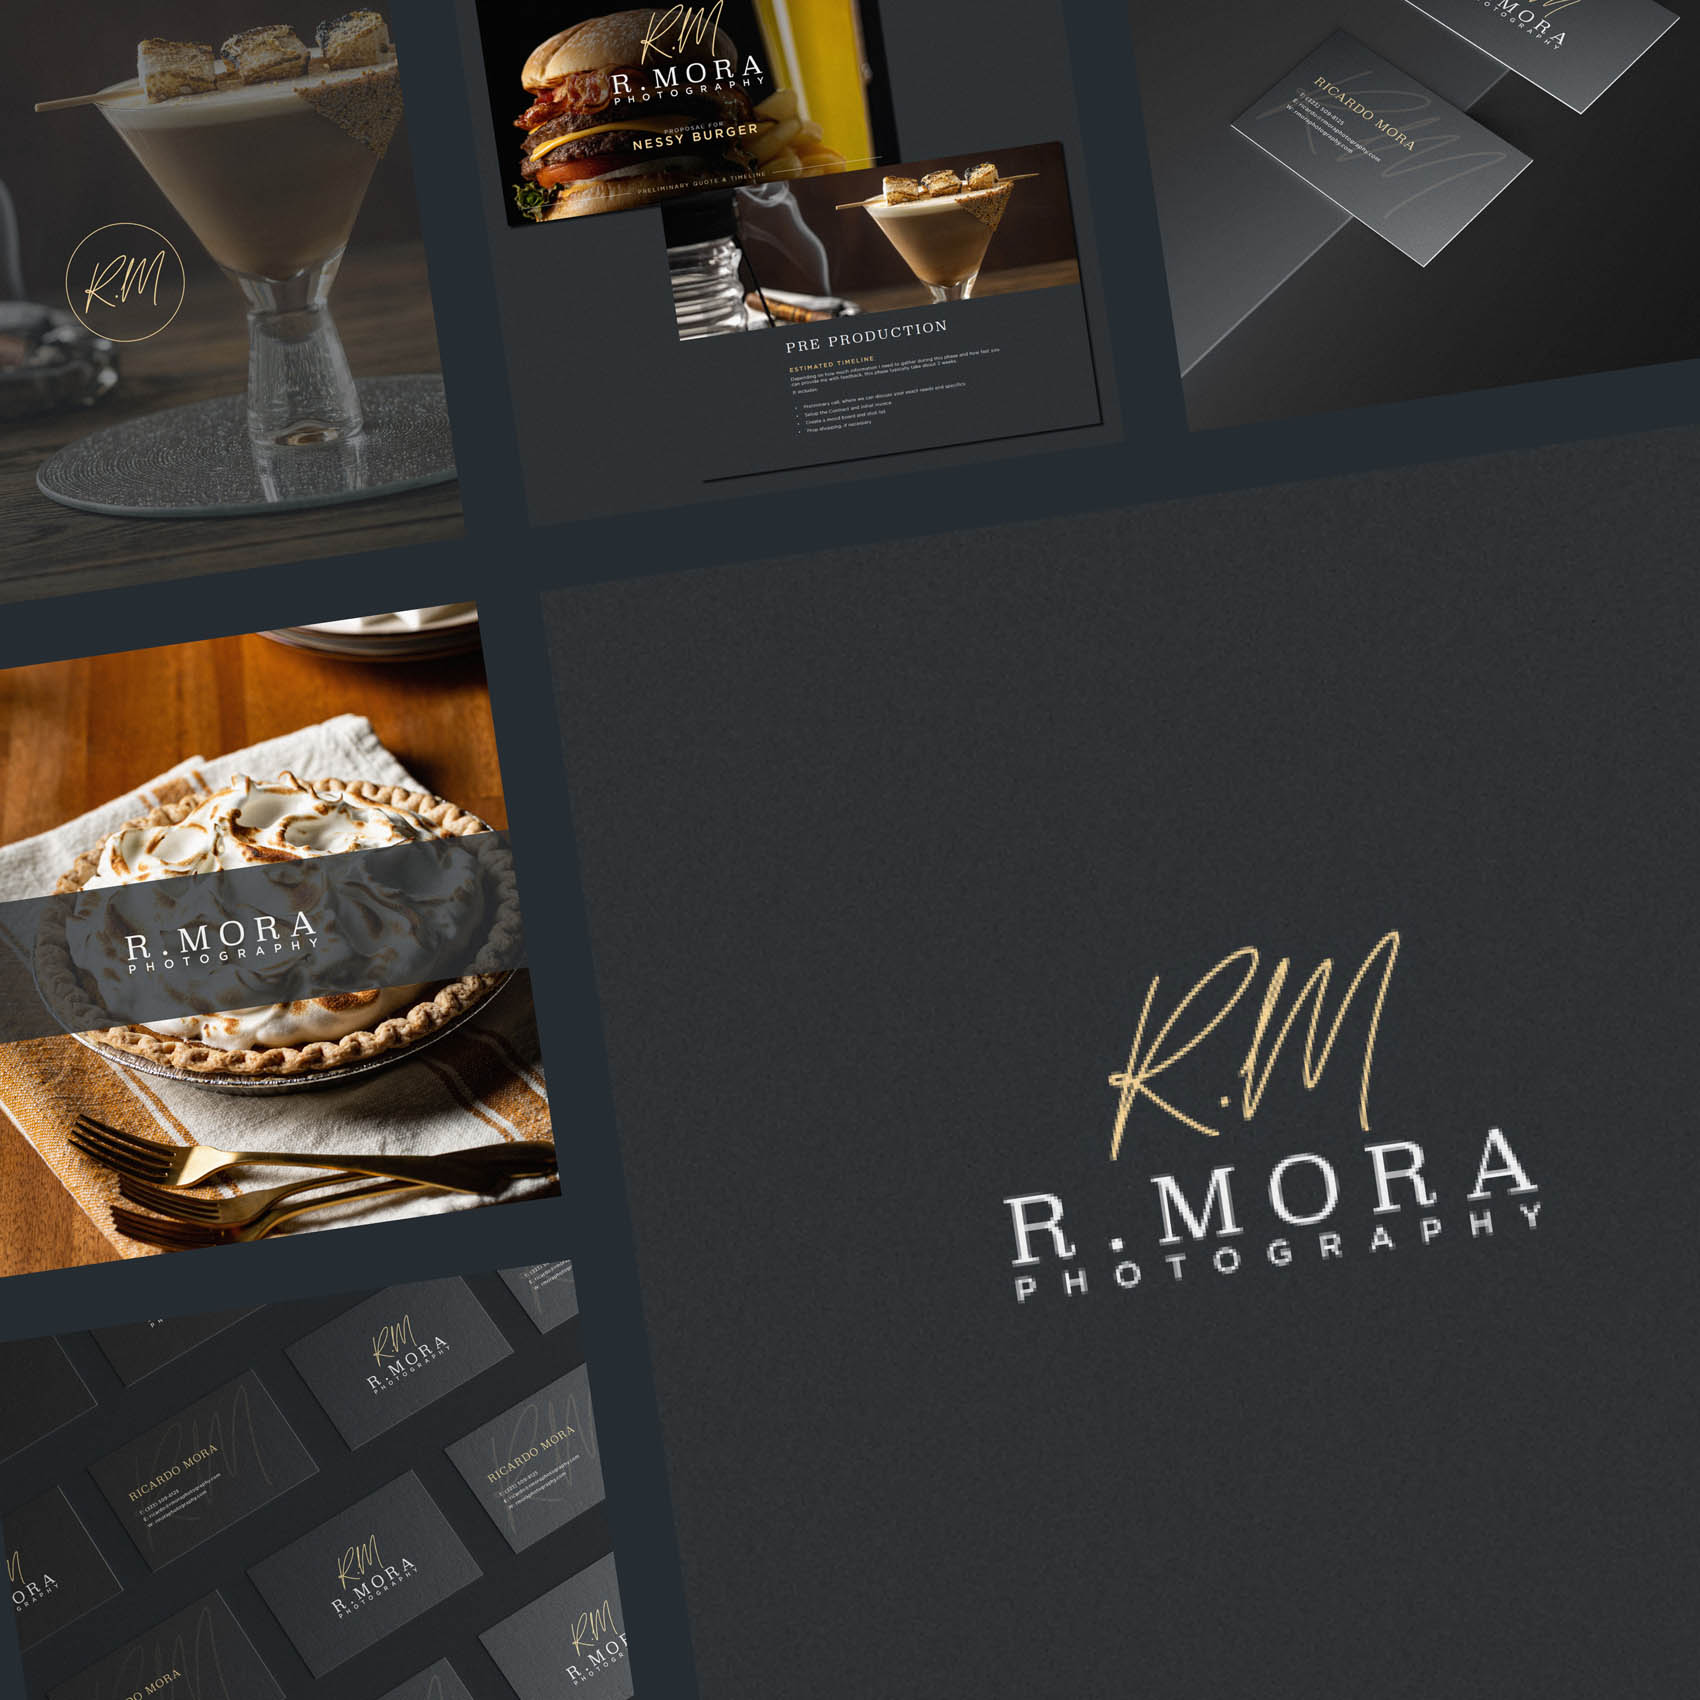 R Mora Photography - Branding and Brand Identity Design Project London